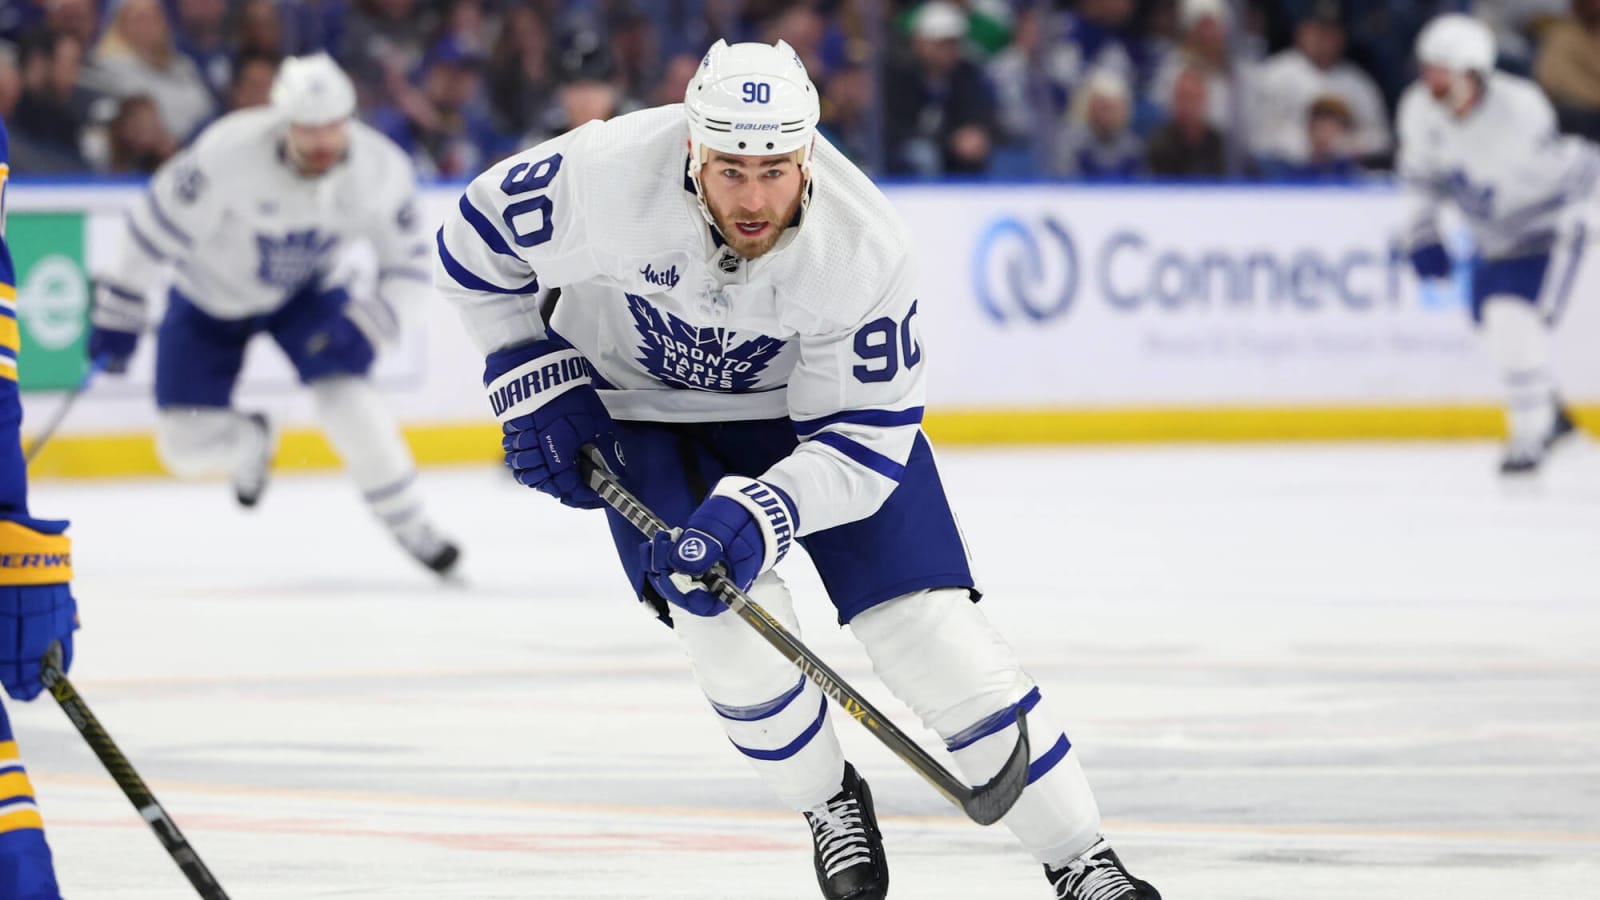 The Maple Leafs have gotten early returns from O’Reilly